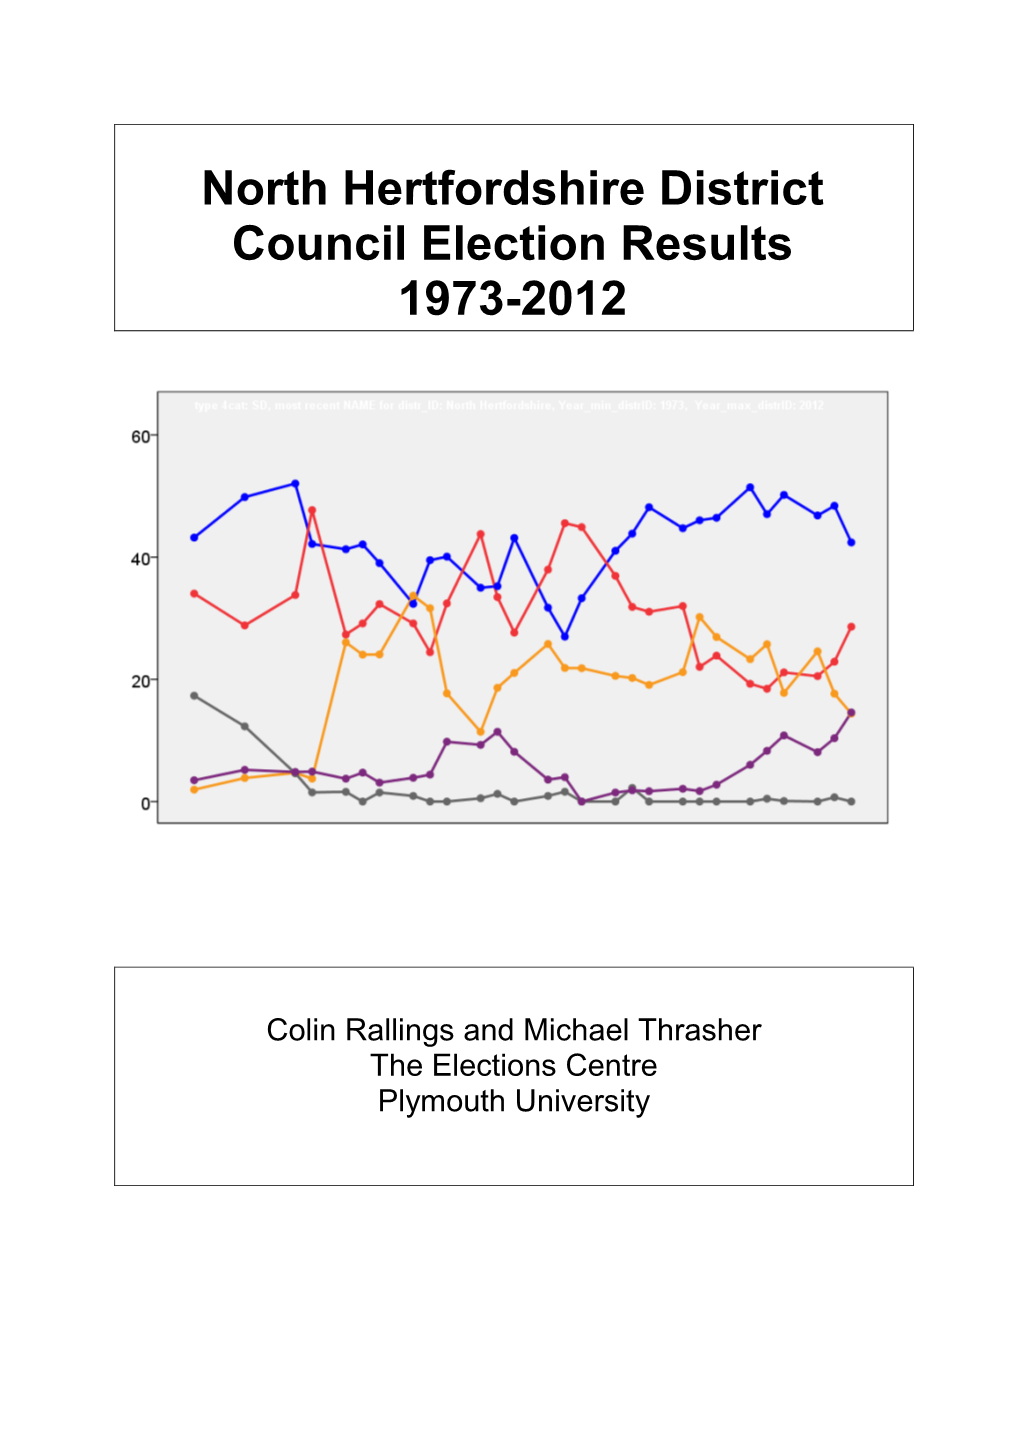 North Hertfordshire District Council Election Results 1973-2012